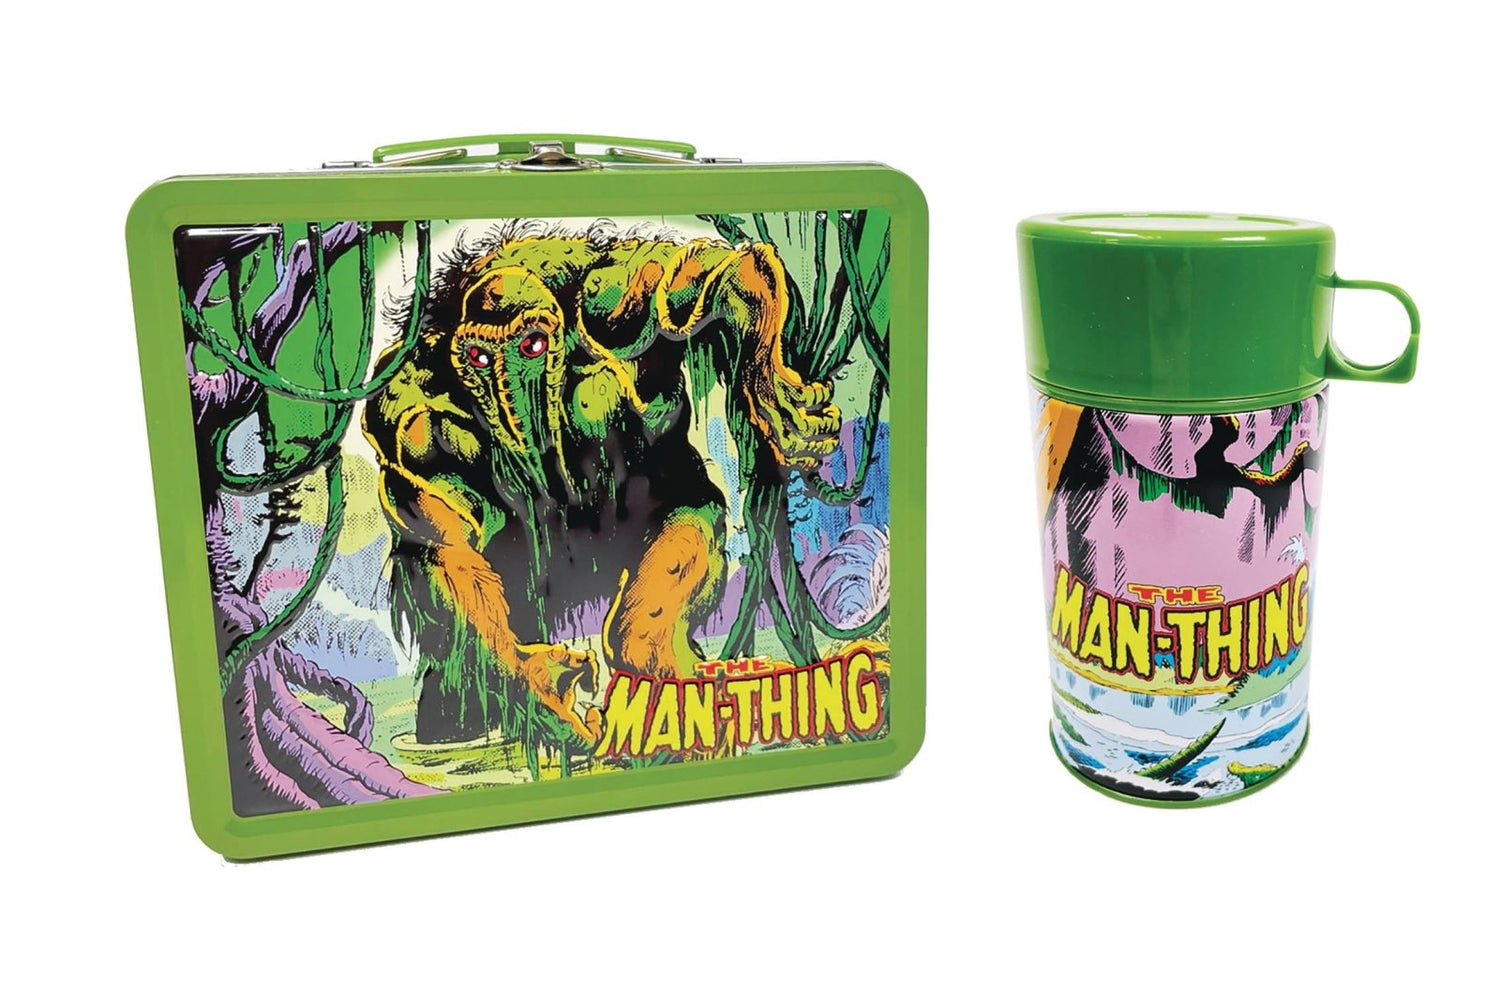 Marvel Man-Thing Lunch Box and Beverage Container - The Fourth Place